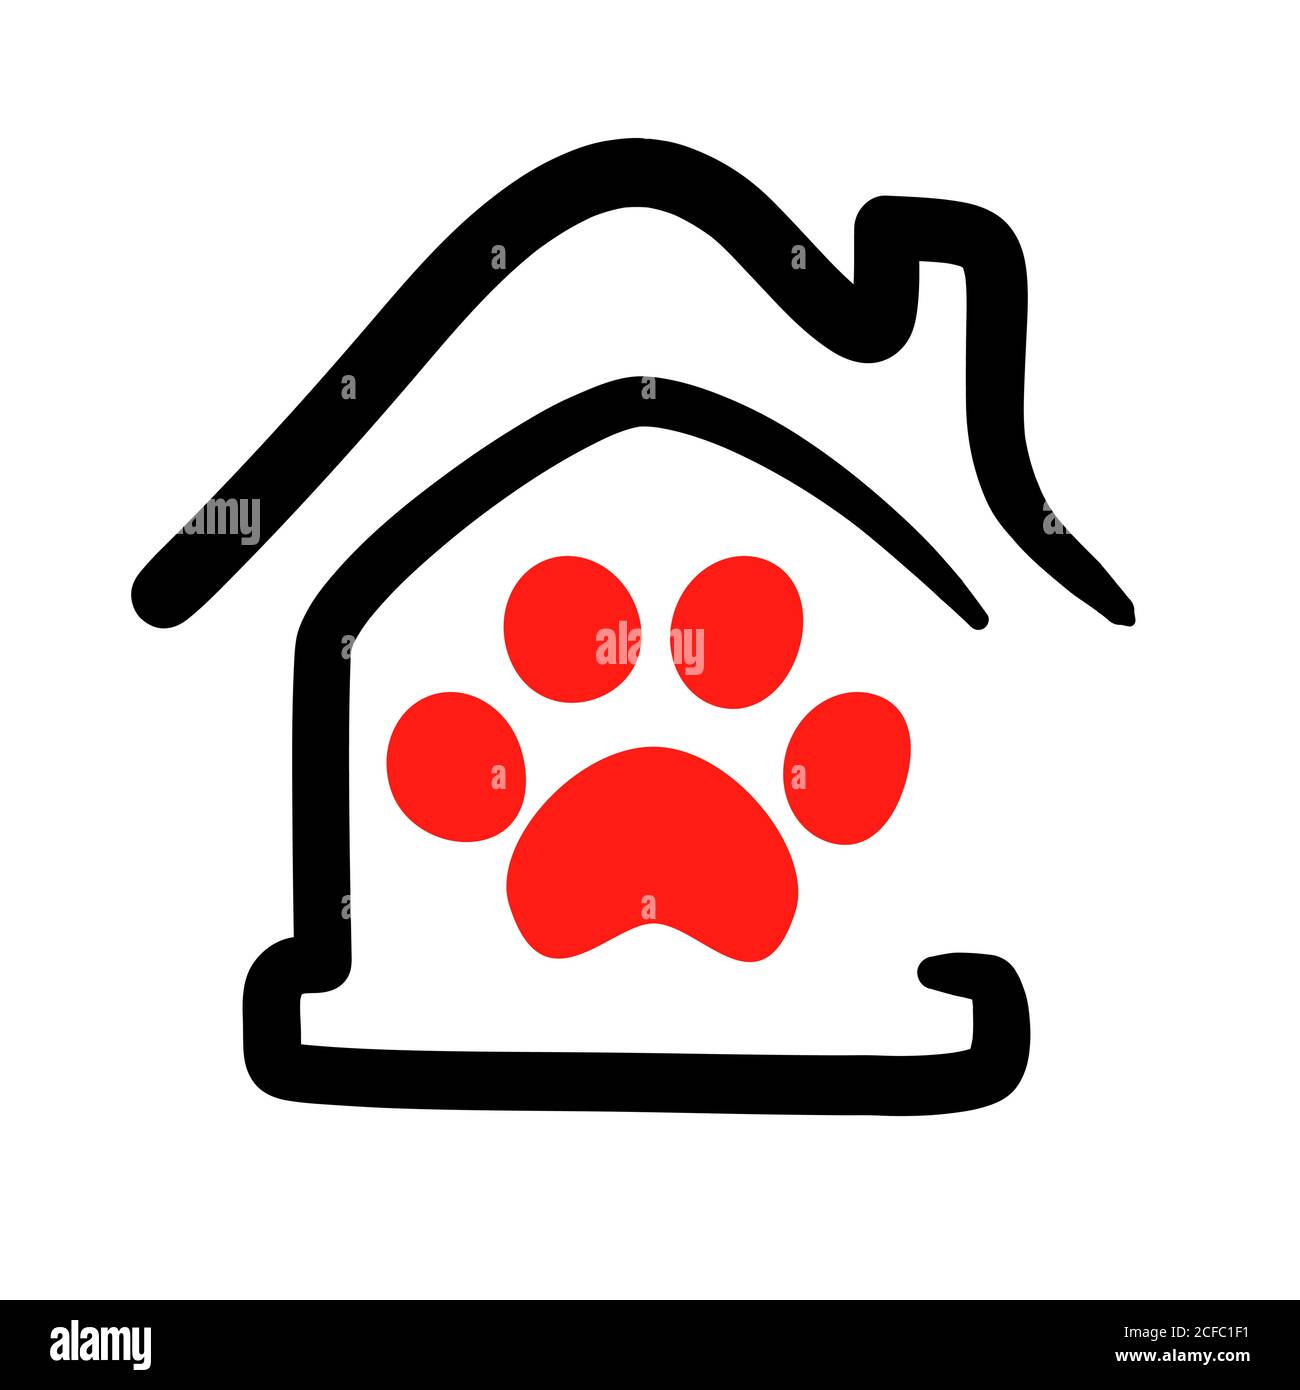 Pets home logo Isolated vector. Animal paw in outline house illustration. Zoo hotel graphic emblem. Dog sitter abstract sign. Pet icon for veterinary, shop, store or grooming service. Stock Vector